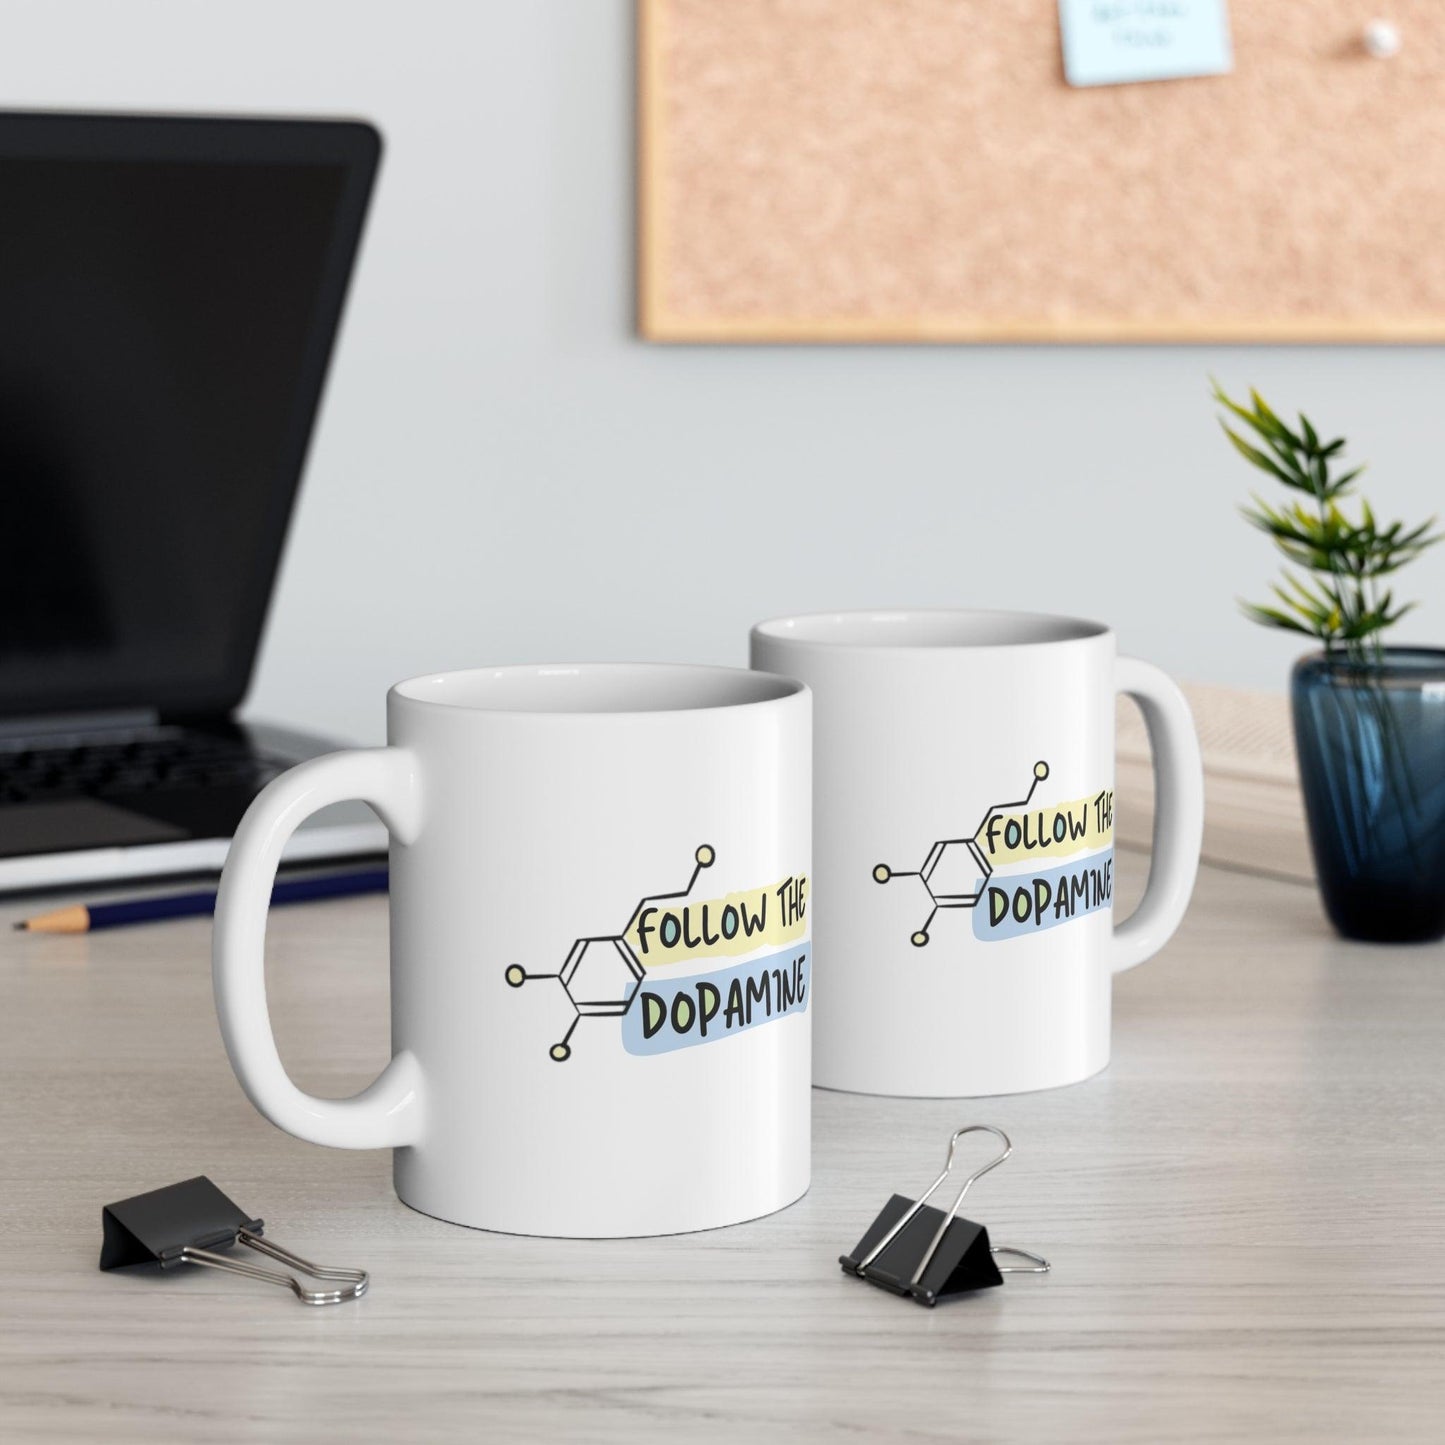 Follow the Dopamine Mug - Navigate Your Neurochemical Pathways - Inspirational ADHD Coffee Cup - Fidget and Focus